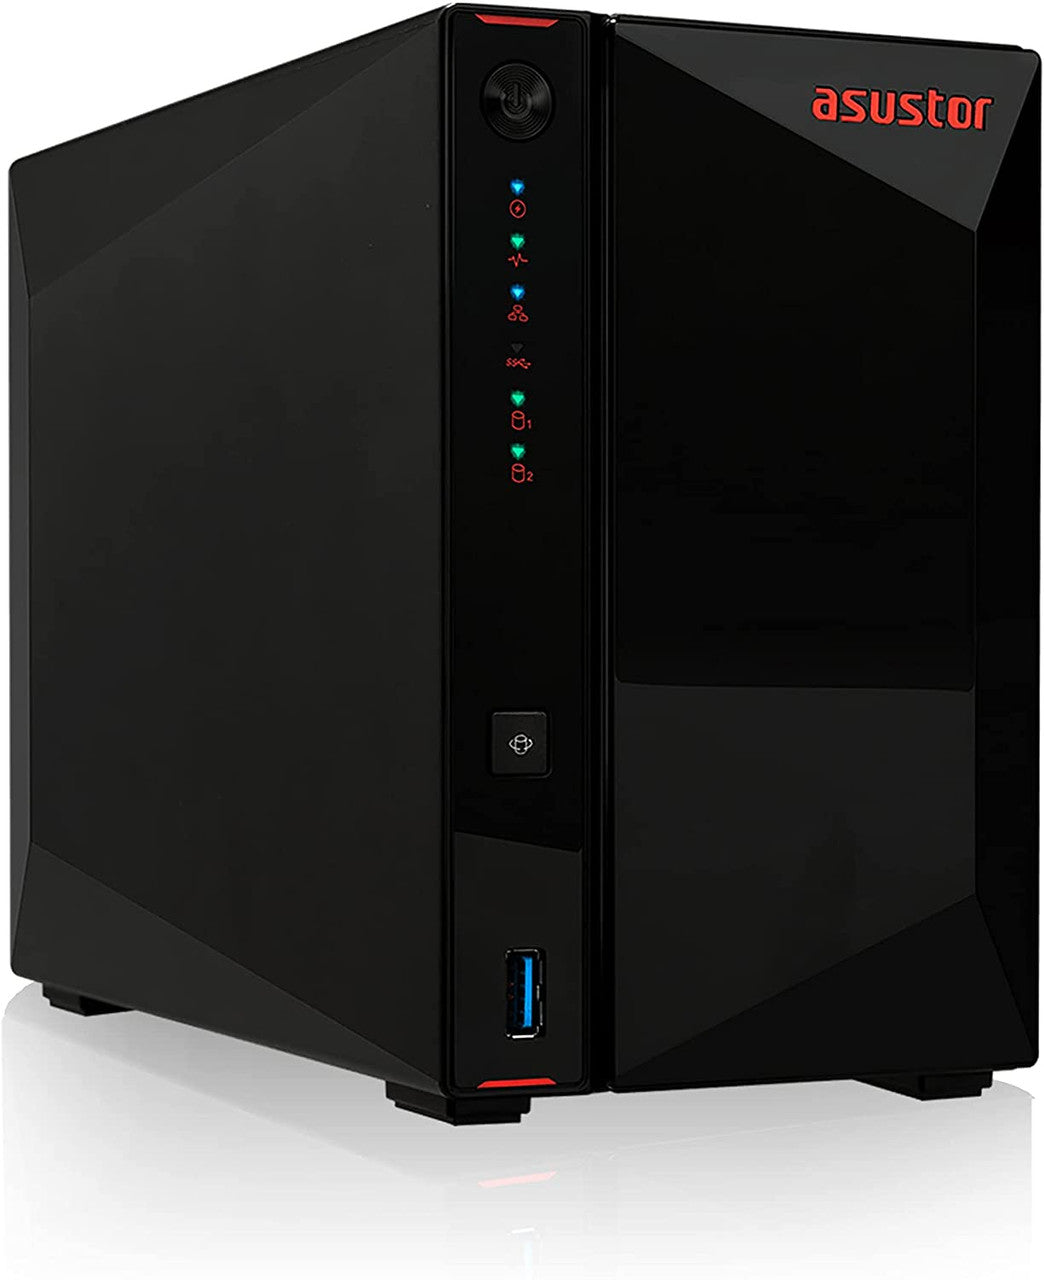 Asustor AS5202T 2-Bay Nimbustor 2 NAS with 2GB RAM and 16TB (2 x 8TB) Western Digital RED PRO Drives Fully Assembled and Tested